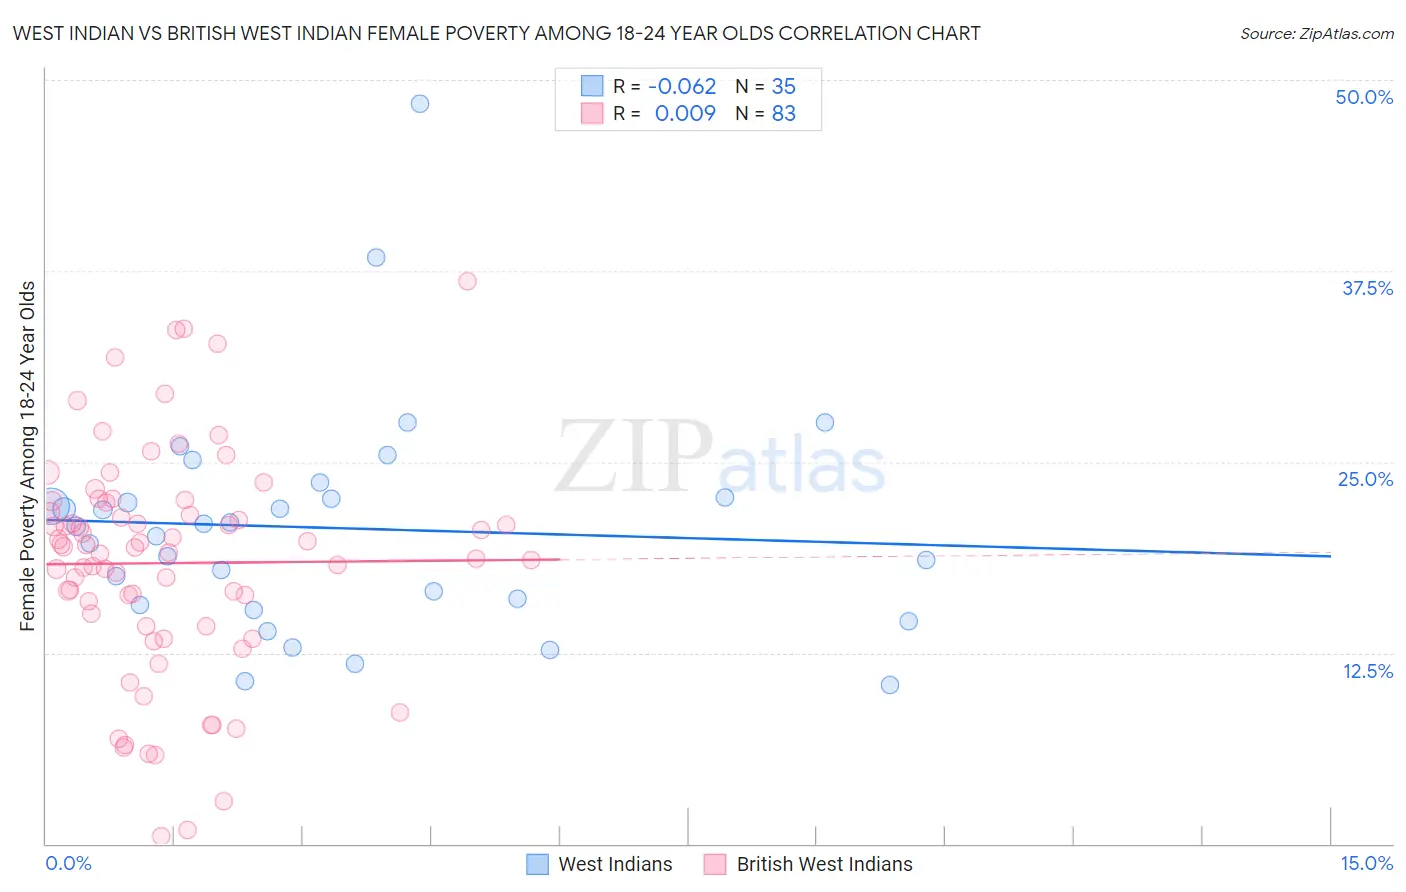 West Indian vs British West Indian Female Poverty Among 18-24 Year Olds